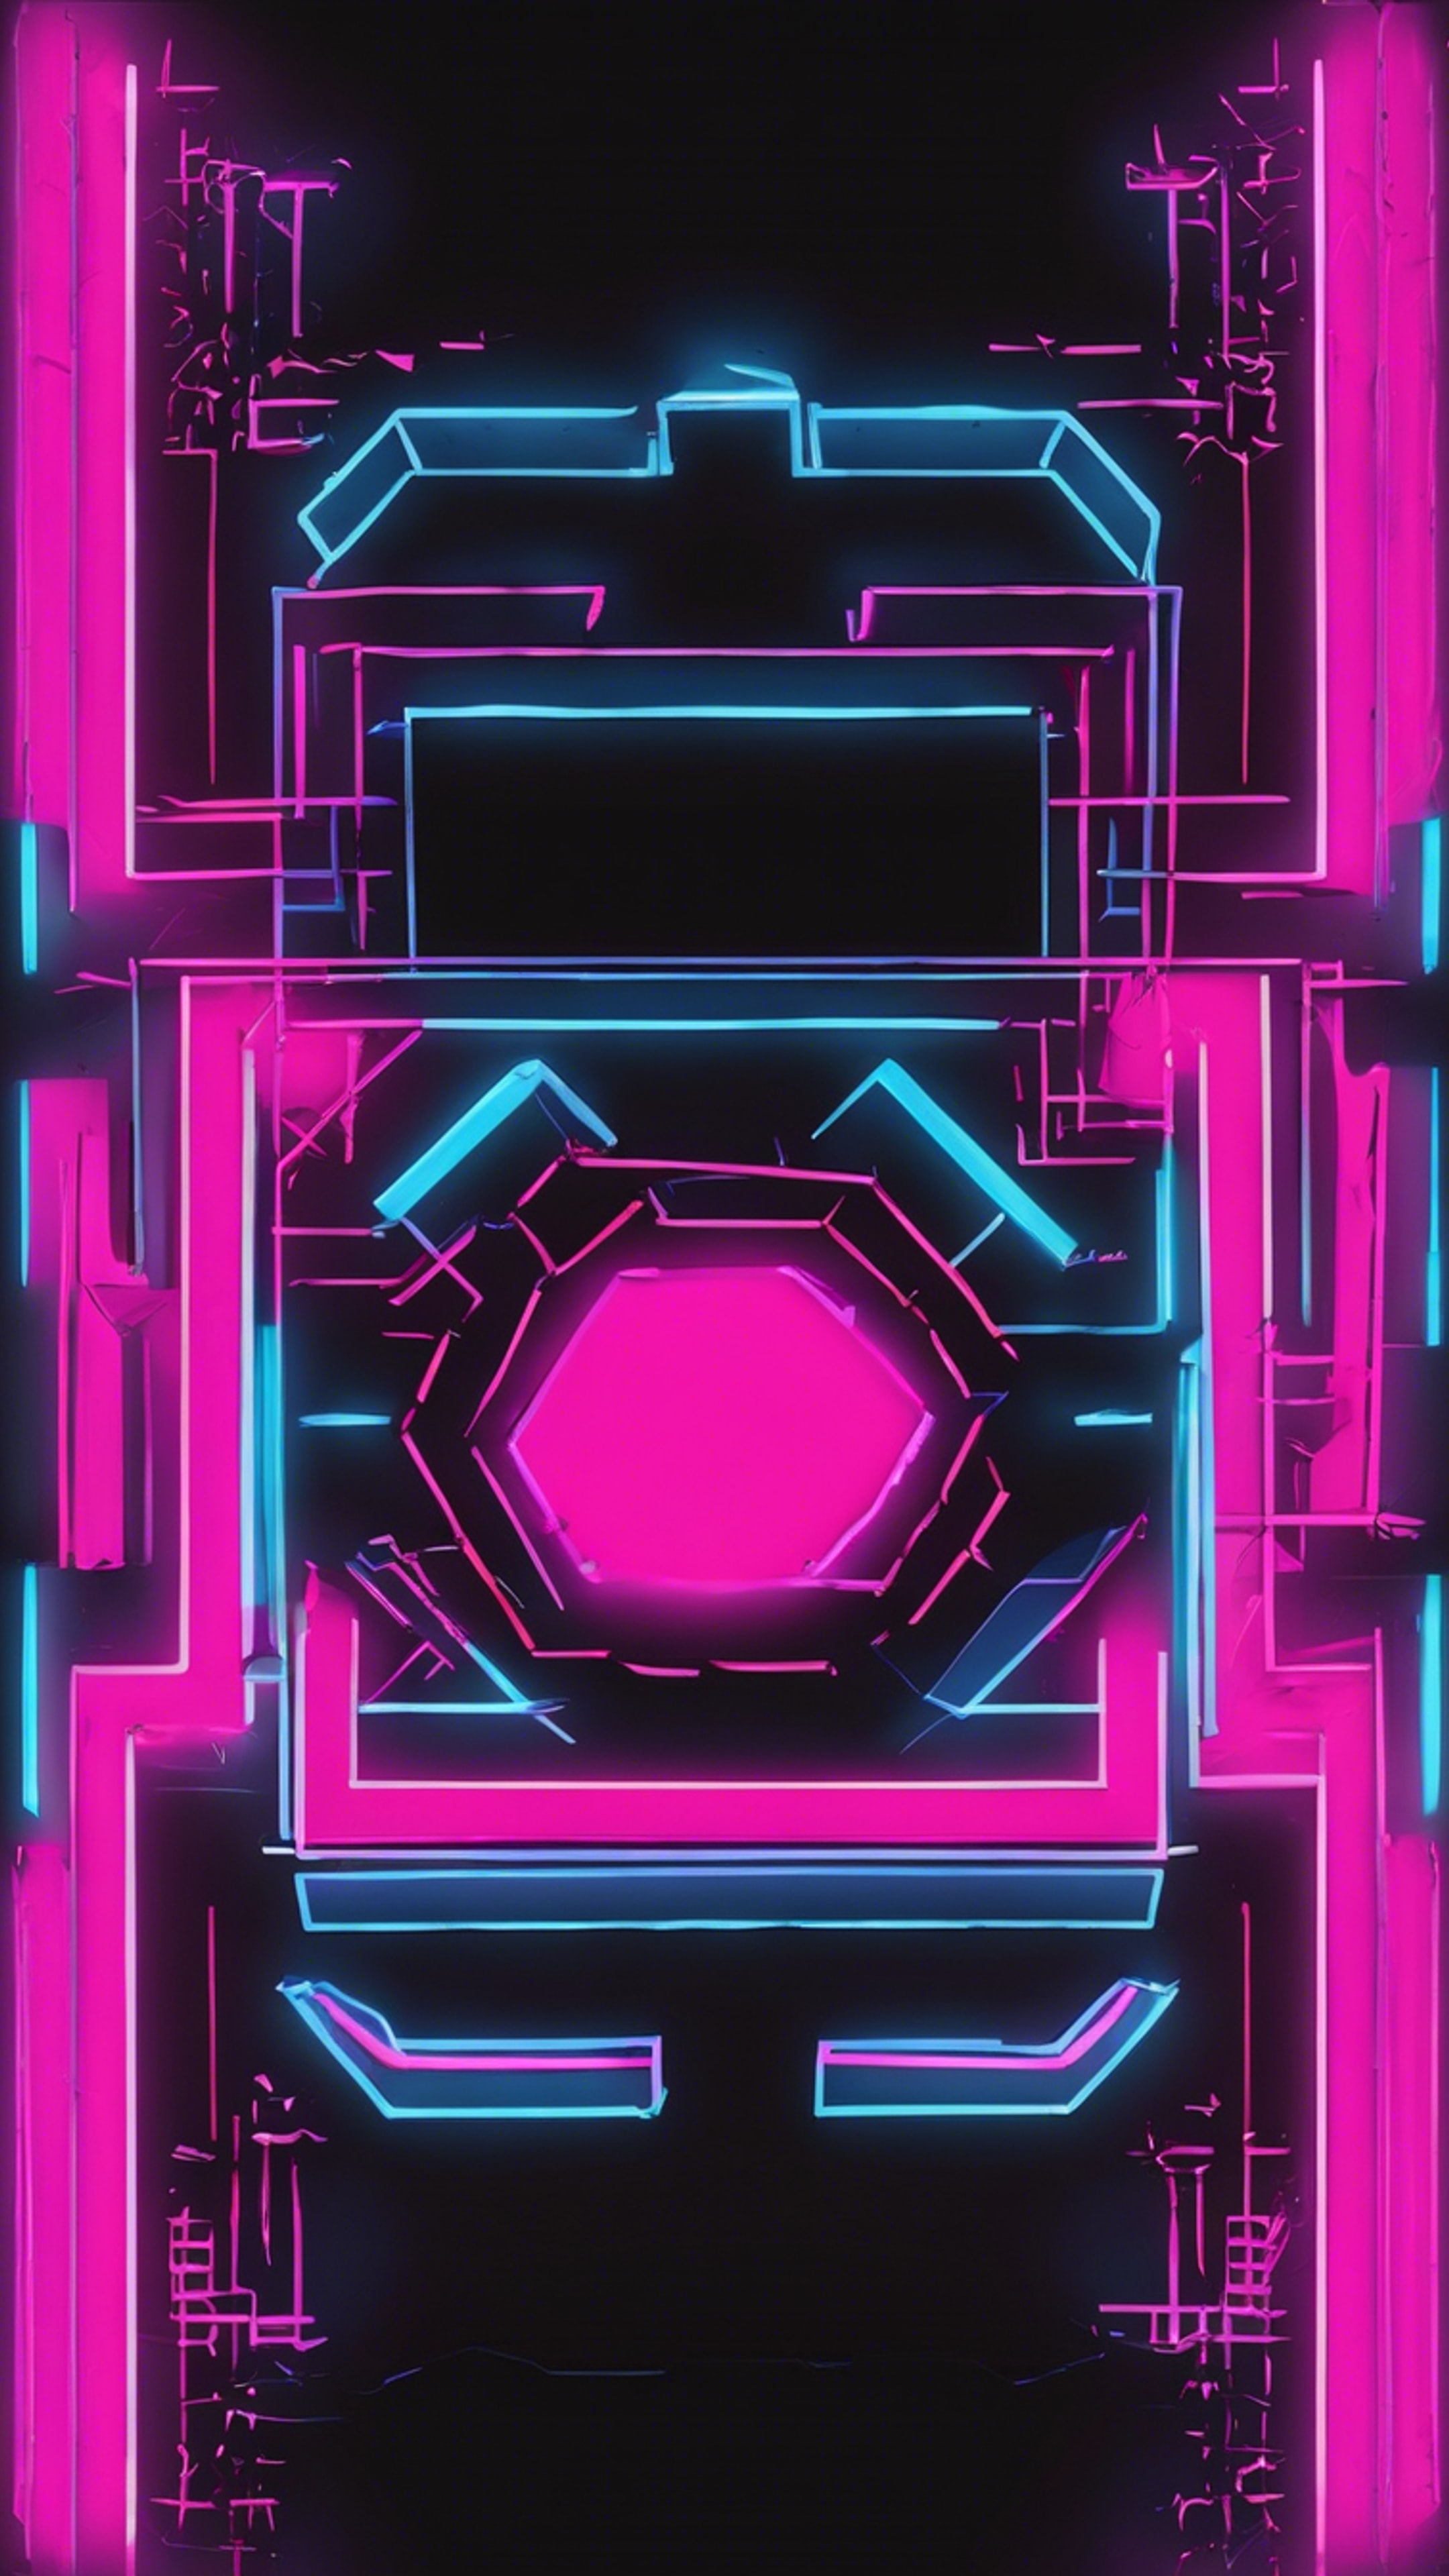 Bright neon pink and blue geometric shapes against a black background, reminiscent of 80s arcade games. Wallpaper[dd42a0f55e3e425295c8]